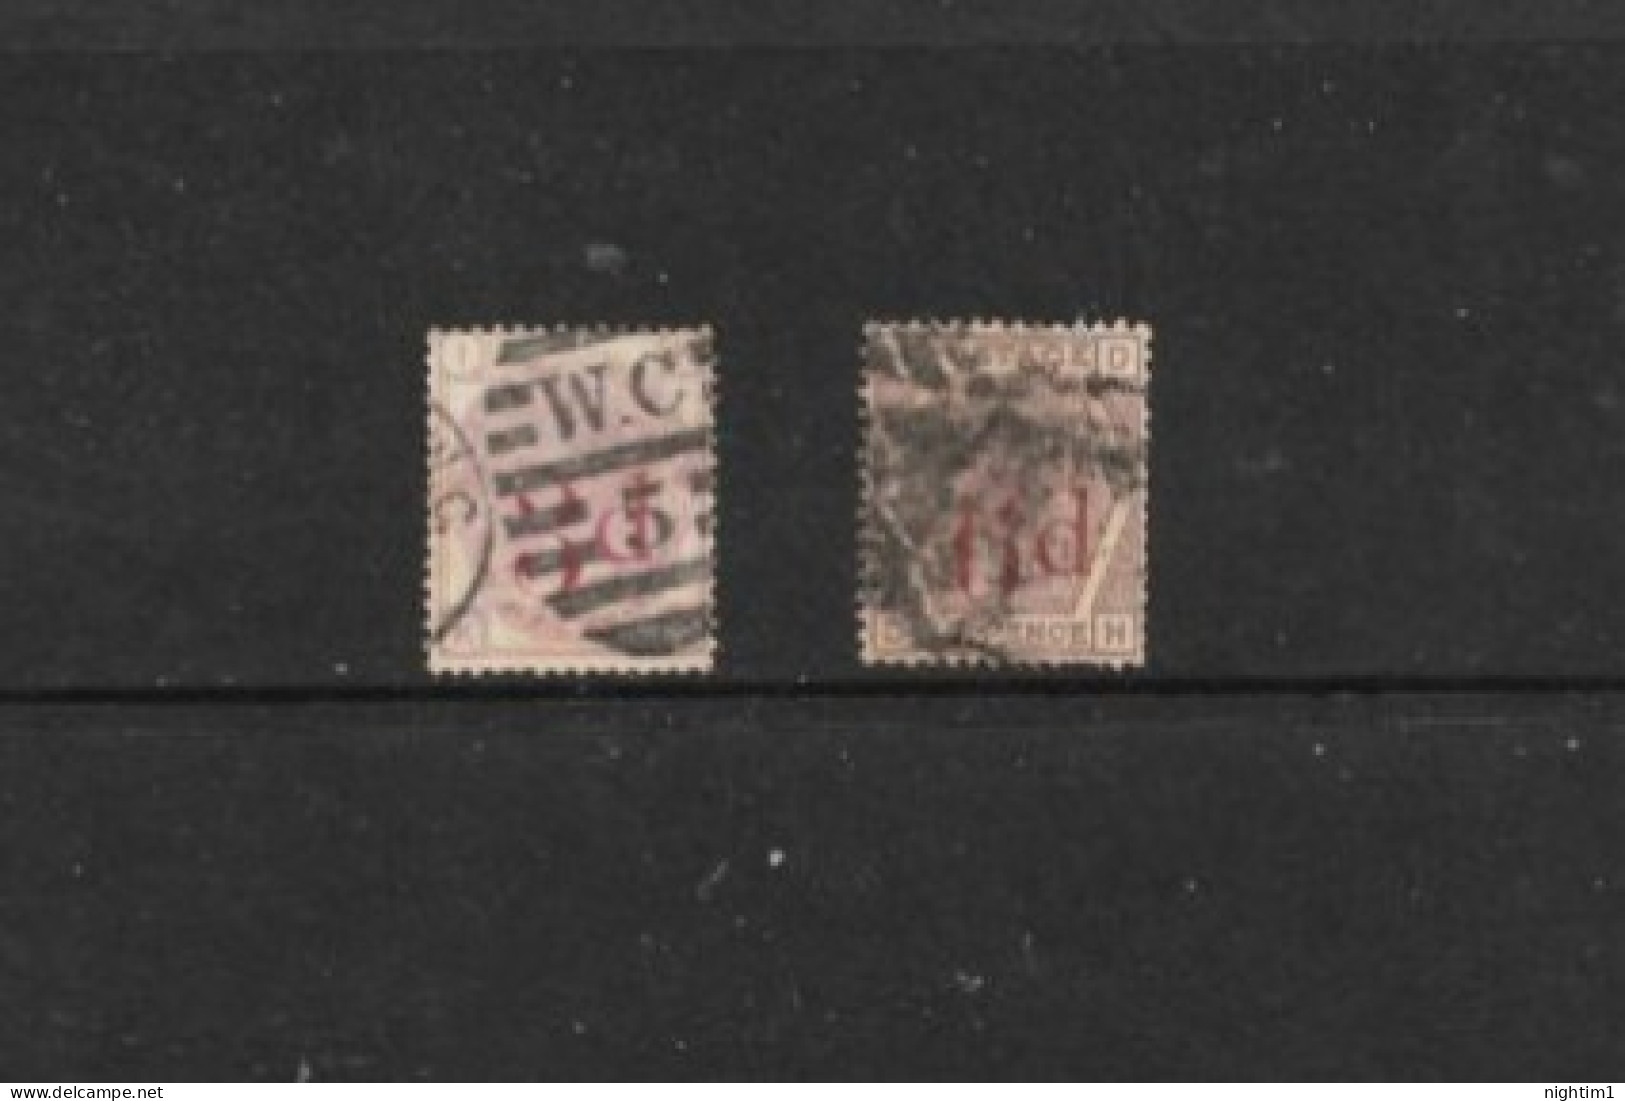 GREAT BRITAIN COLLECTION.  3d ON 3d AND 6d ON 6d. TWO STAMPS. - Gebruikt